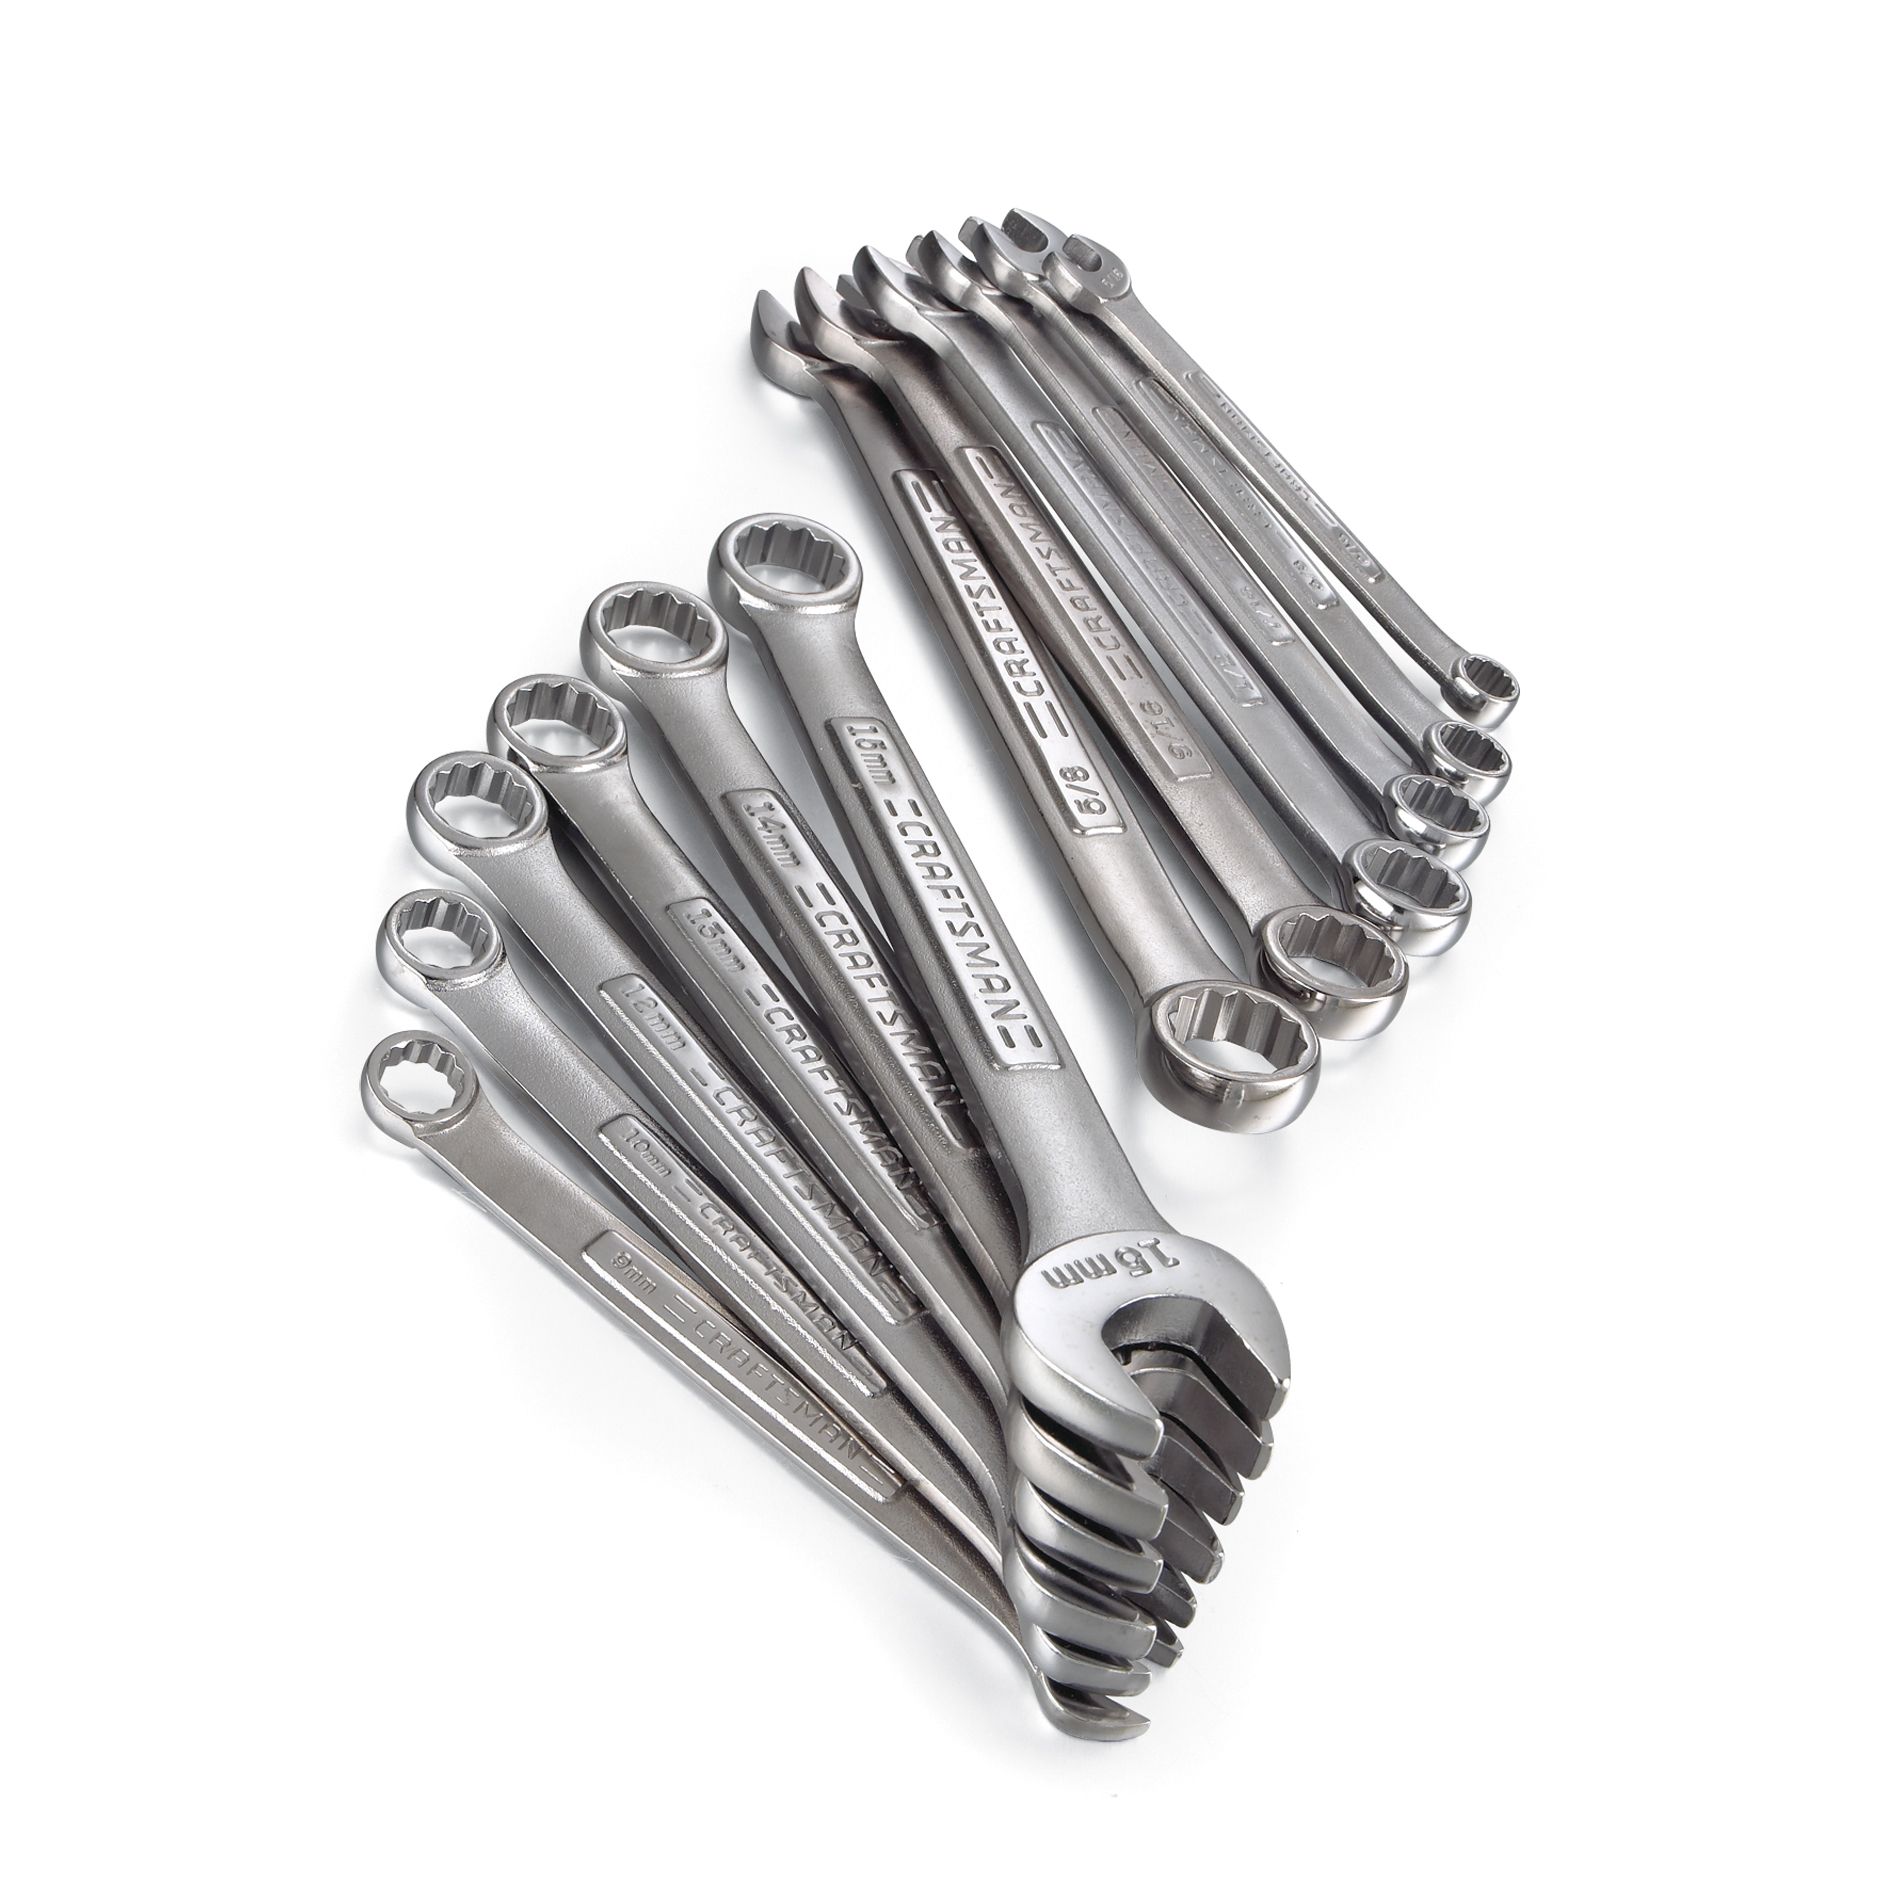 Craftsman 12-pc. Combination Wrench Set, Inch/Metric